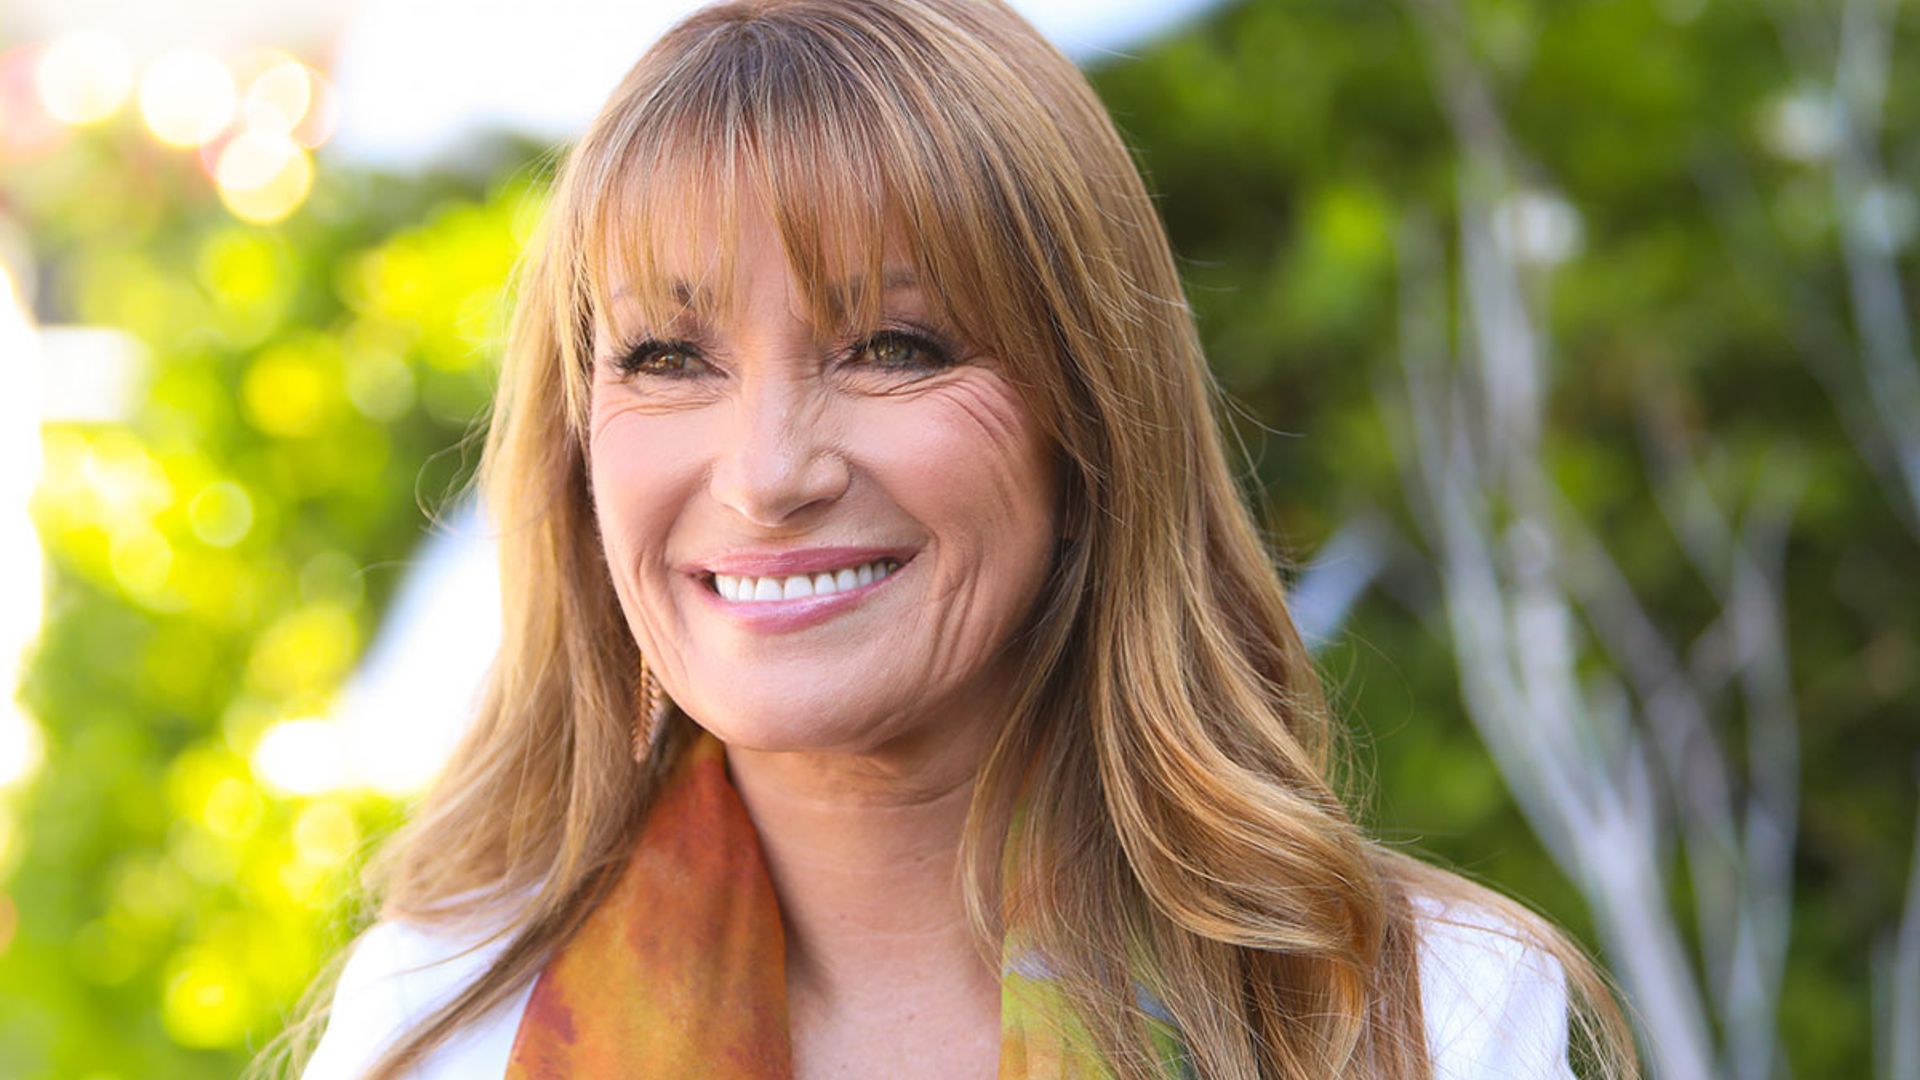 Jane Seymour showcases her ageless beauty as she bathes with elephants in Thailand